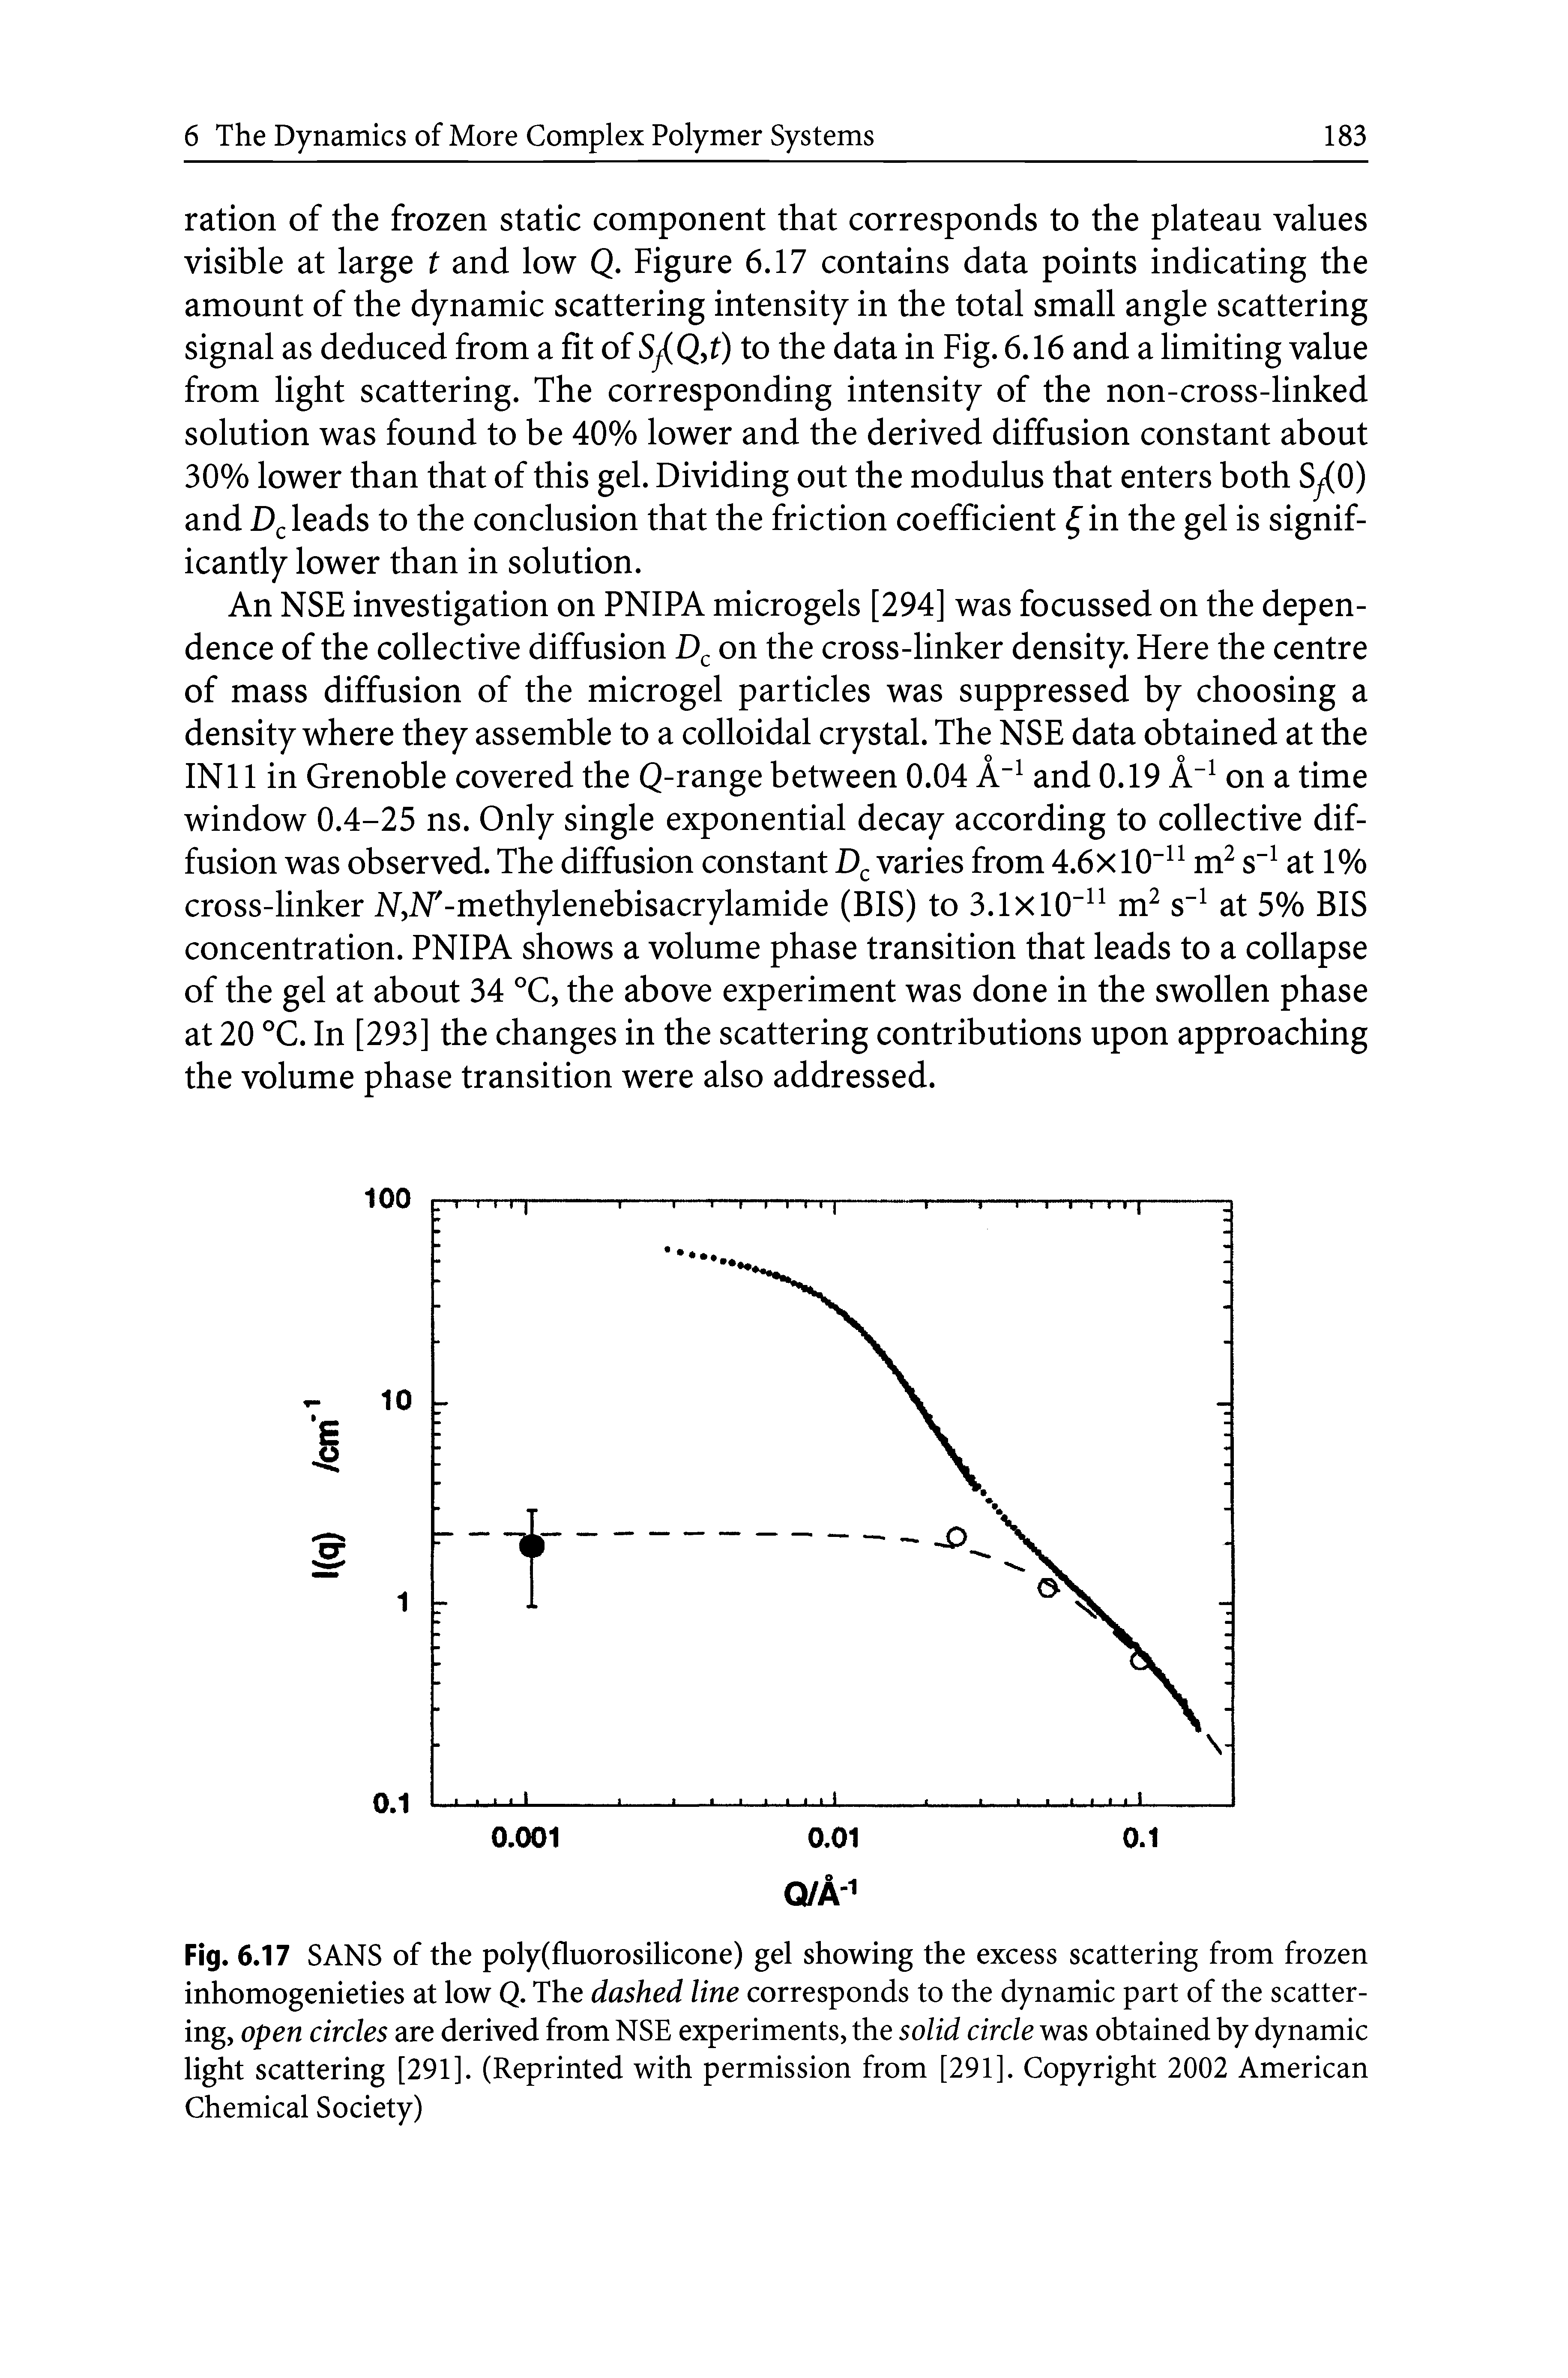 Fig. 6.17 SANS of the poly(fluorosilicone) gel showing the excess scattering from frozen inhomogenieties at low Q. The dashed line corresponds to the dynamic part of the scattering, open circles are derived from NSE experiments, the solid circle was obtained by dynamic light scattering [291]. (Reprinted with permission from [291]. Copyright 2002 American Chemical Society)...